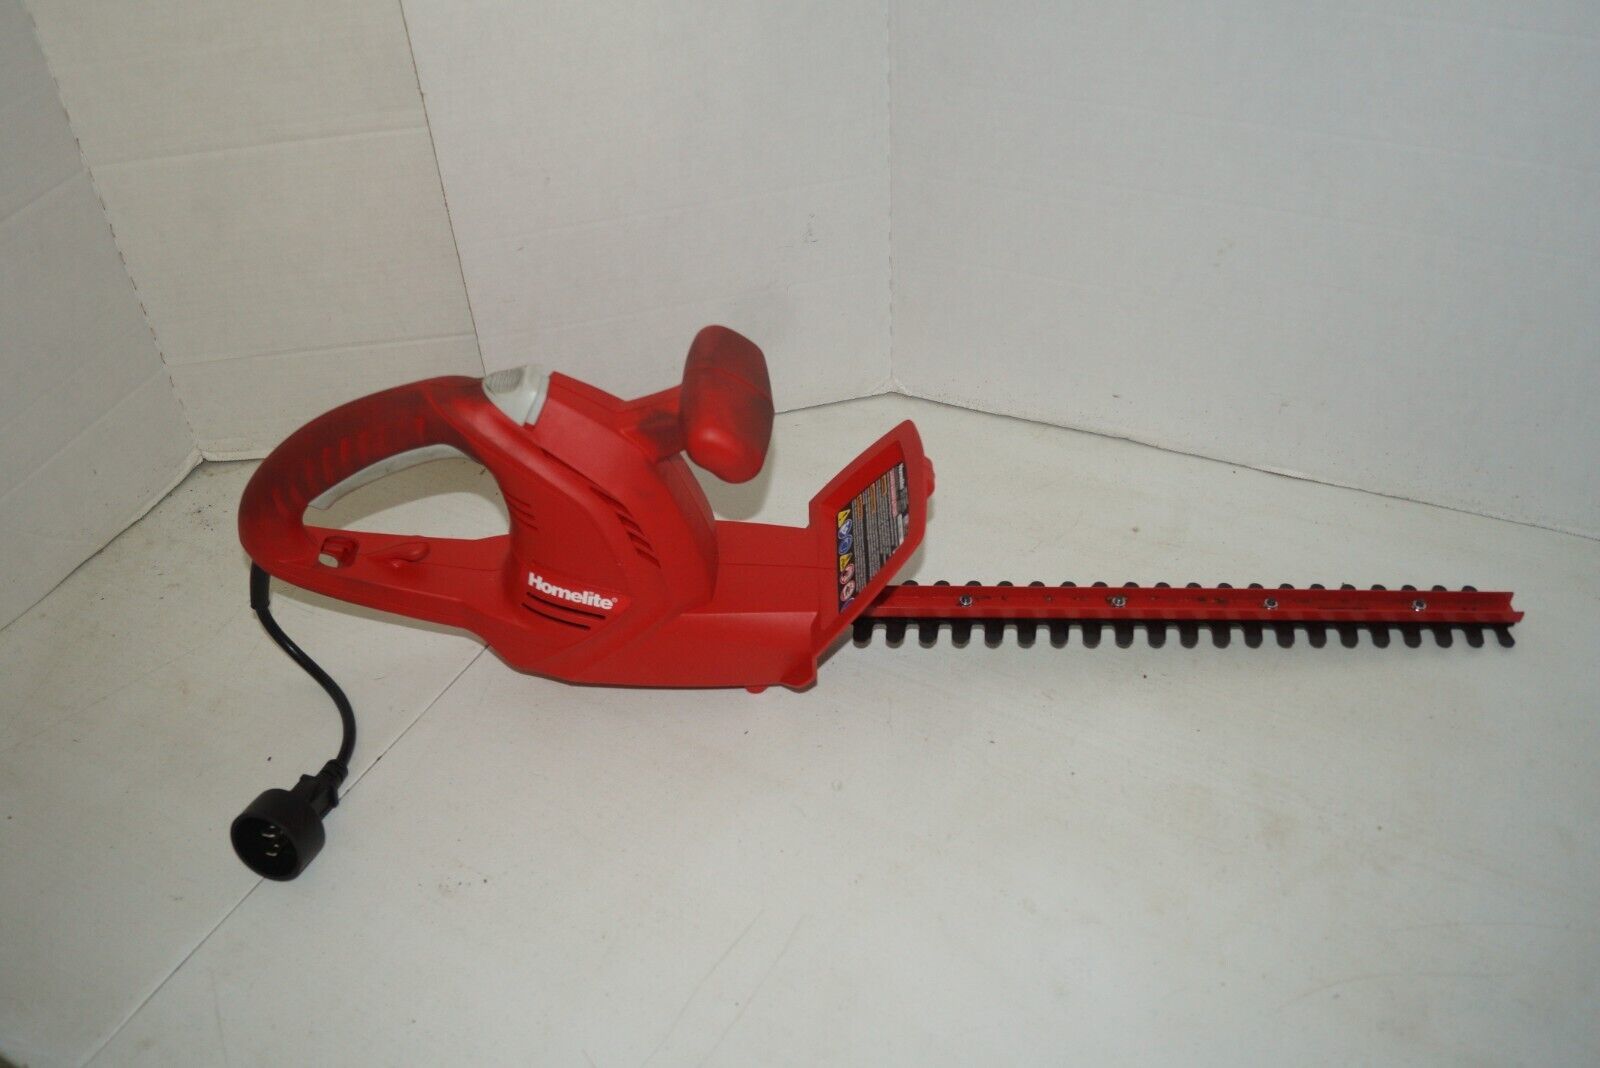 Homelite UT44110 17" Electric Hedge Trimmer USED - $39.59